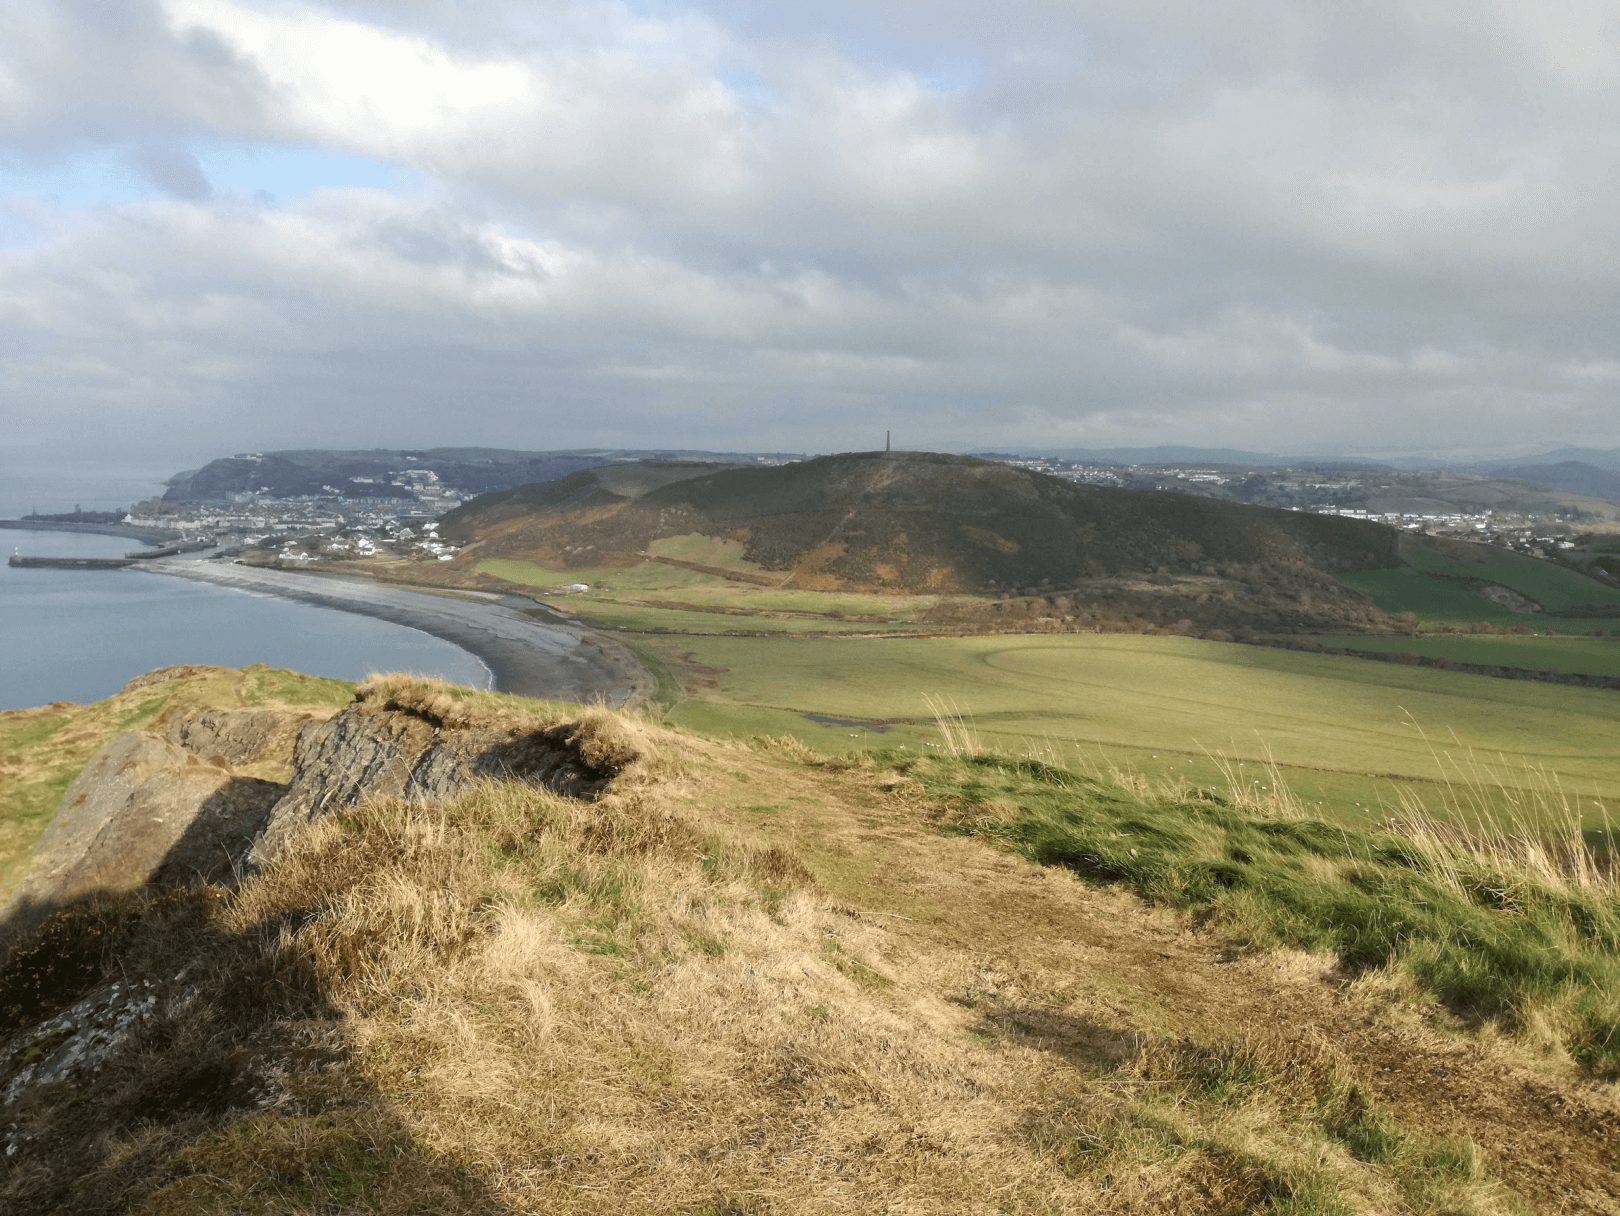 The town of Aberystwyth - panoramic view